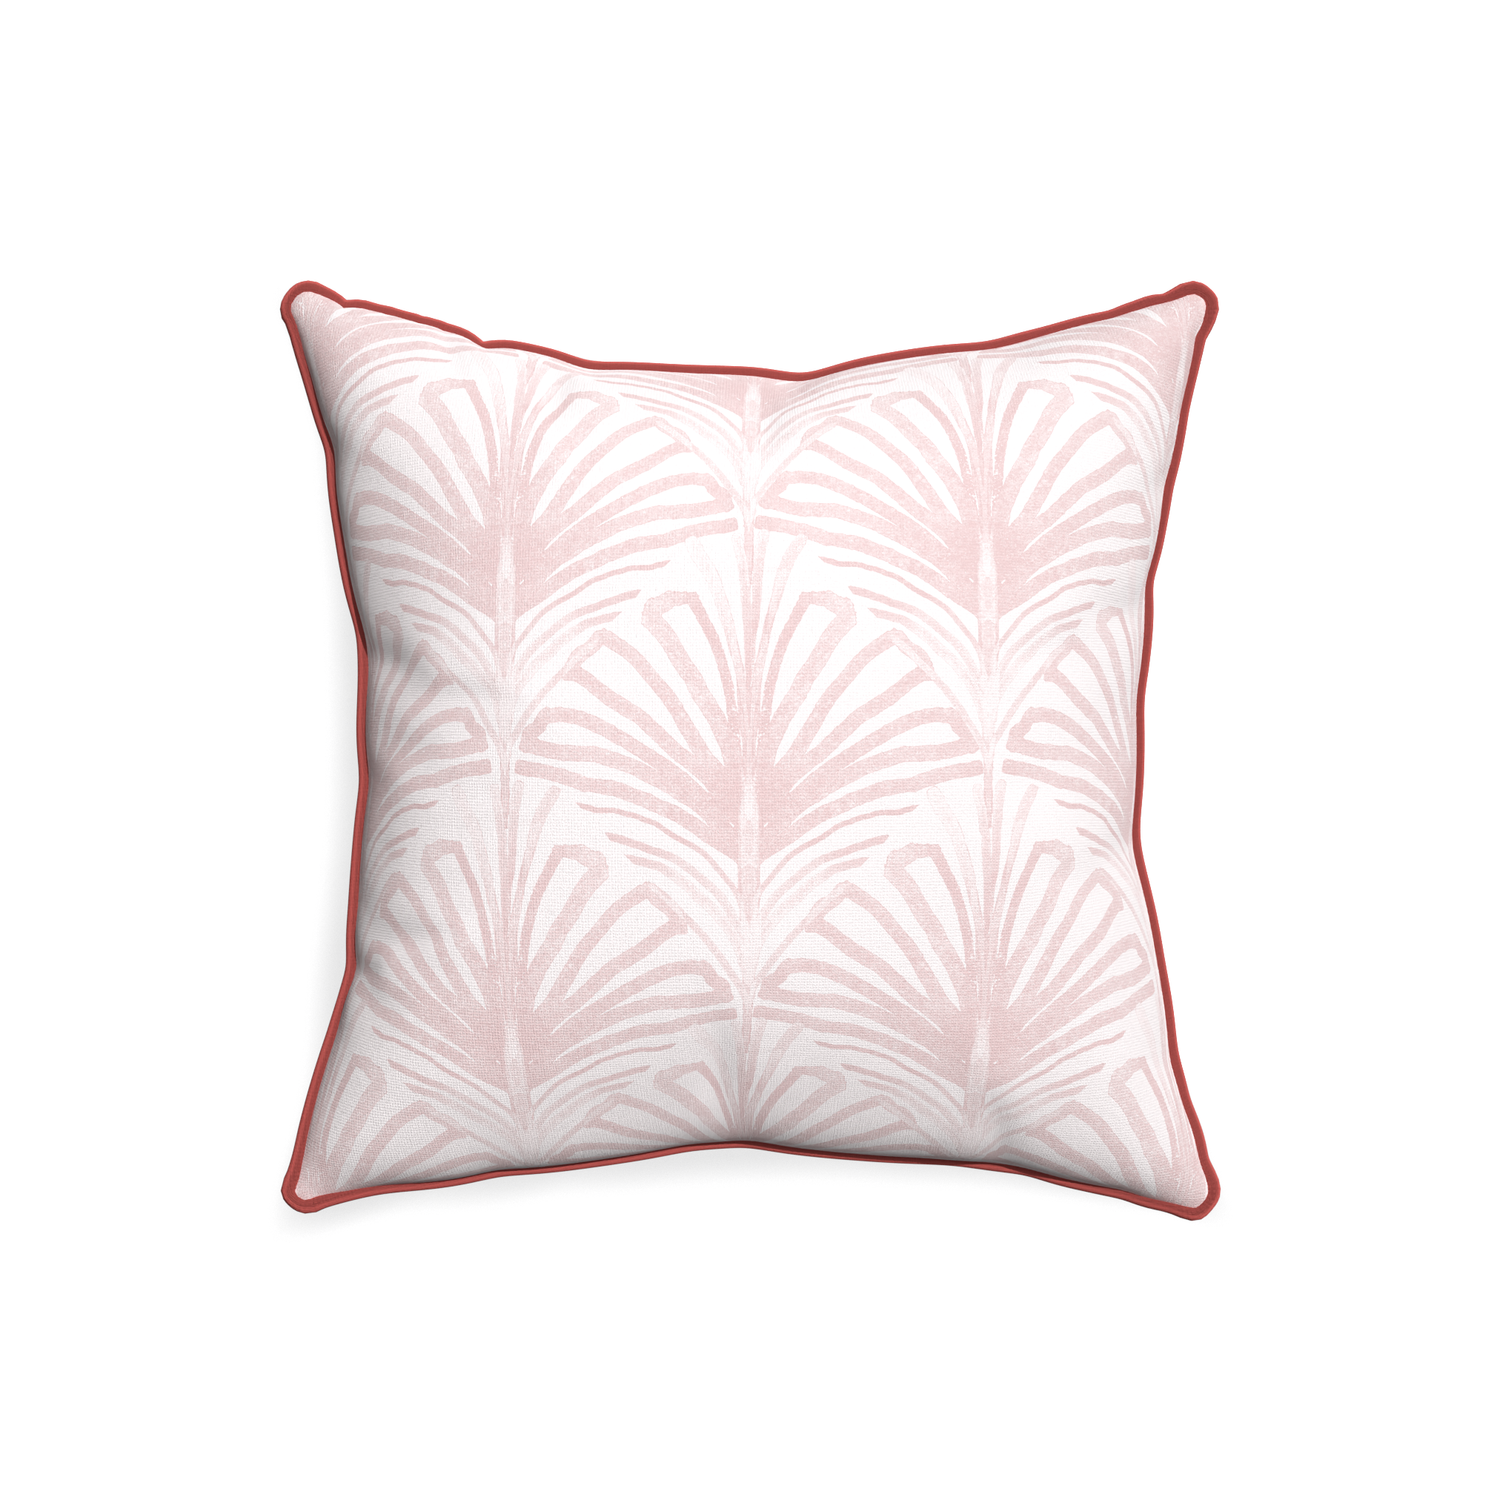 20-square suzy rose custom pillow with c piping on white background